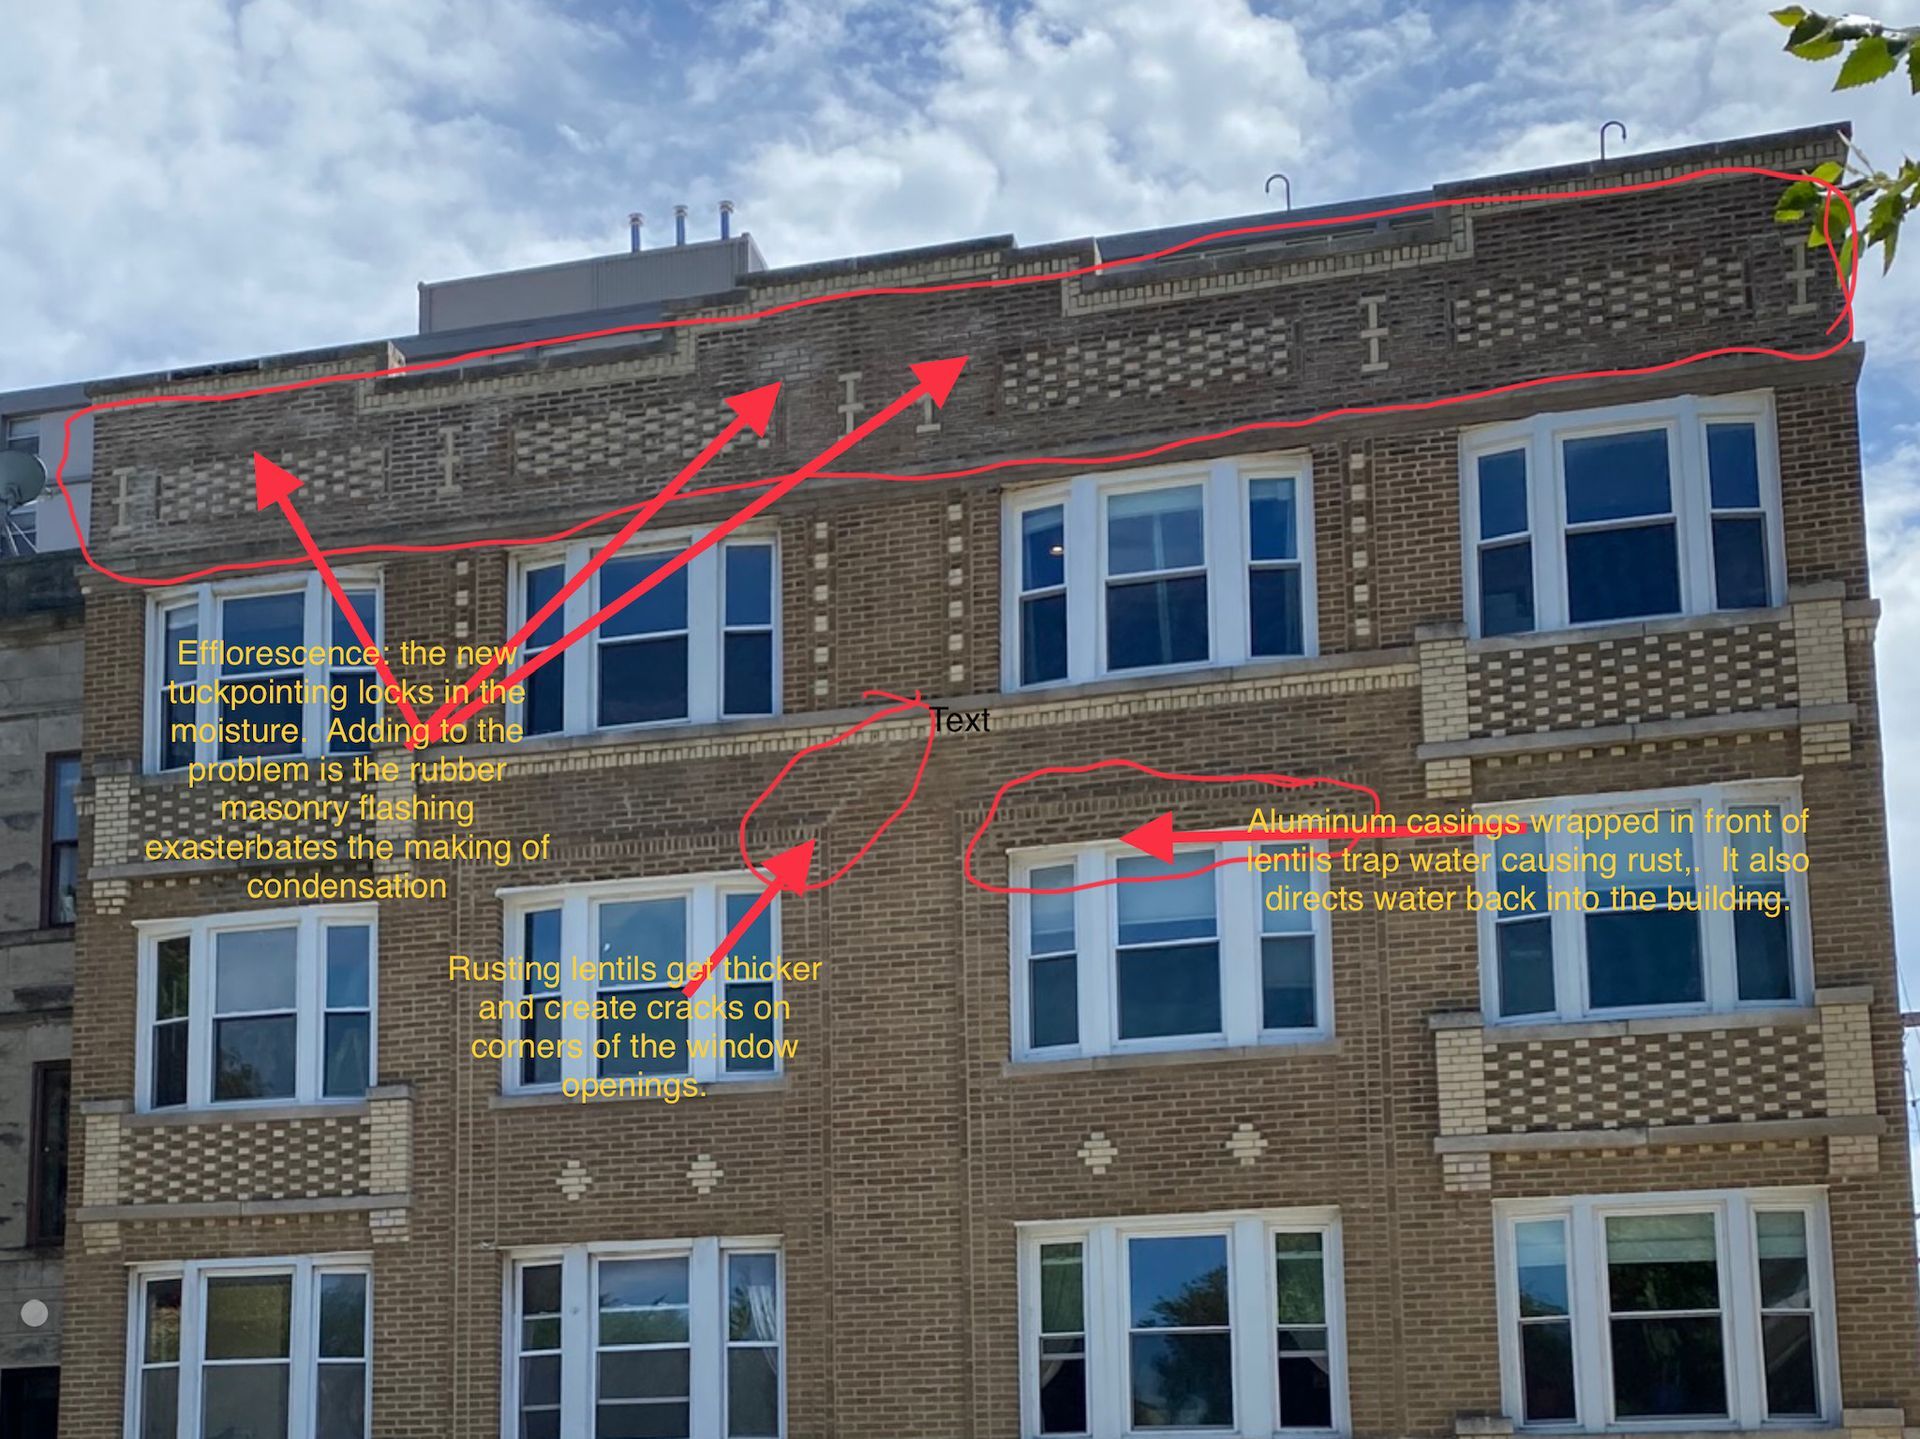 Diagnositc notations on historic brick building in Uptown, Chicago